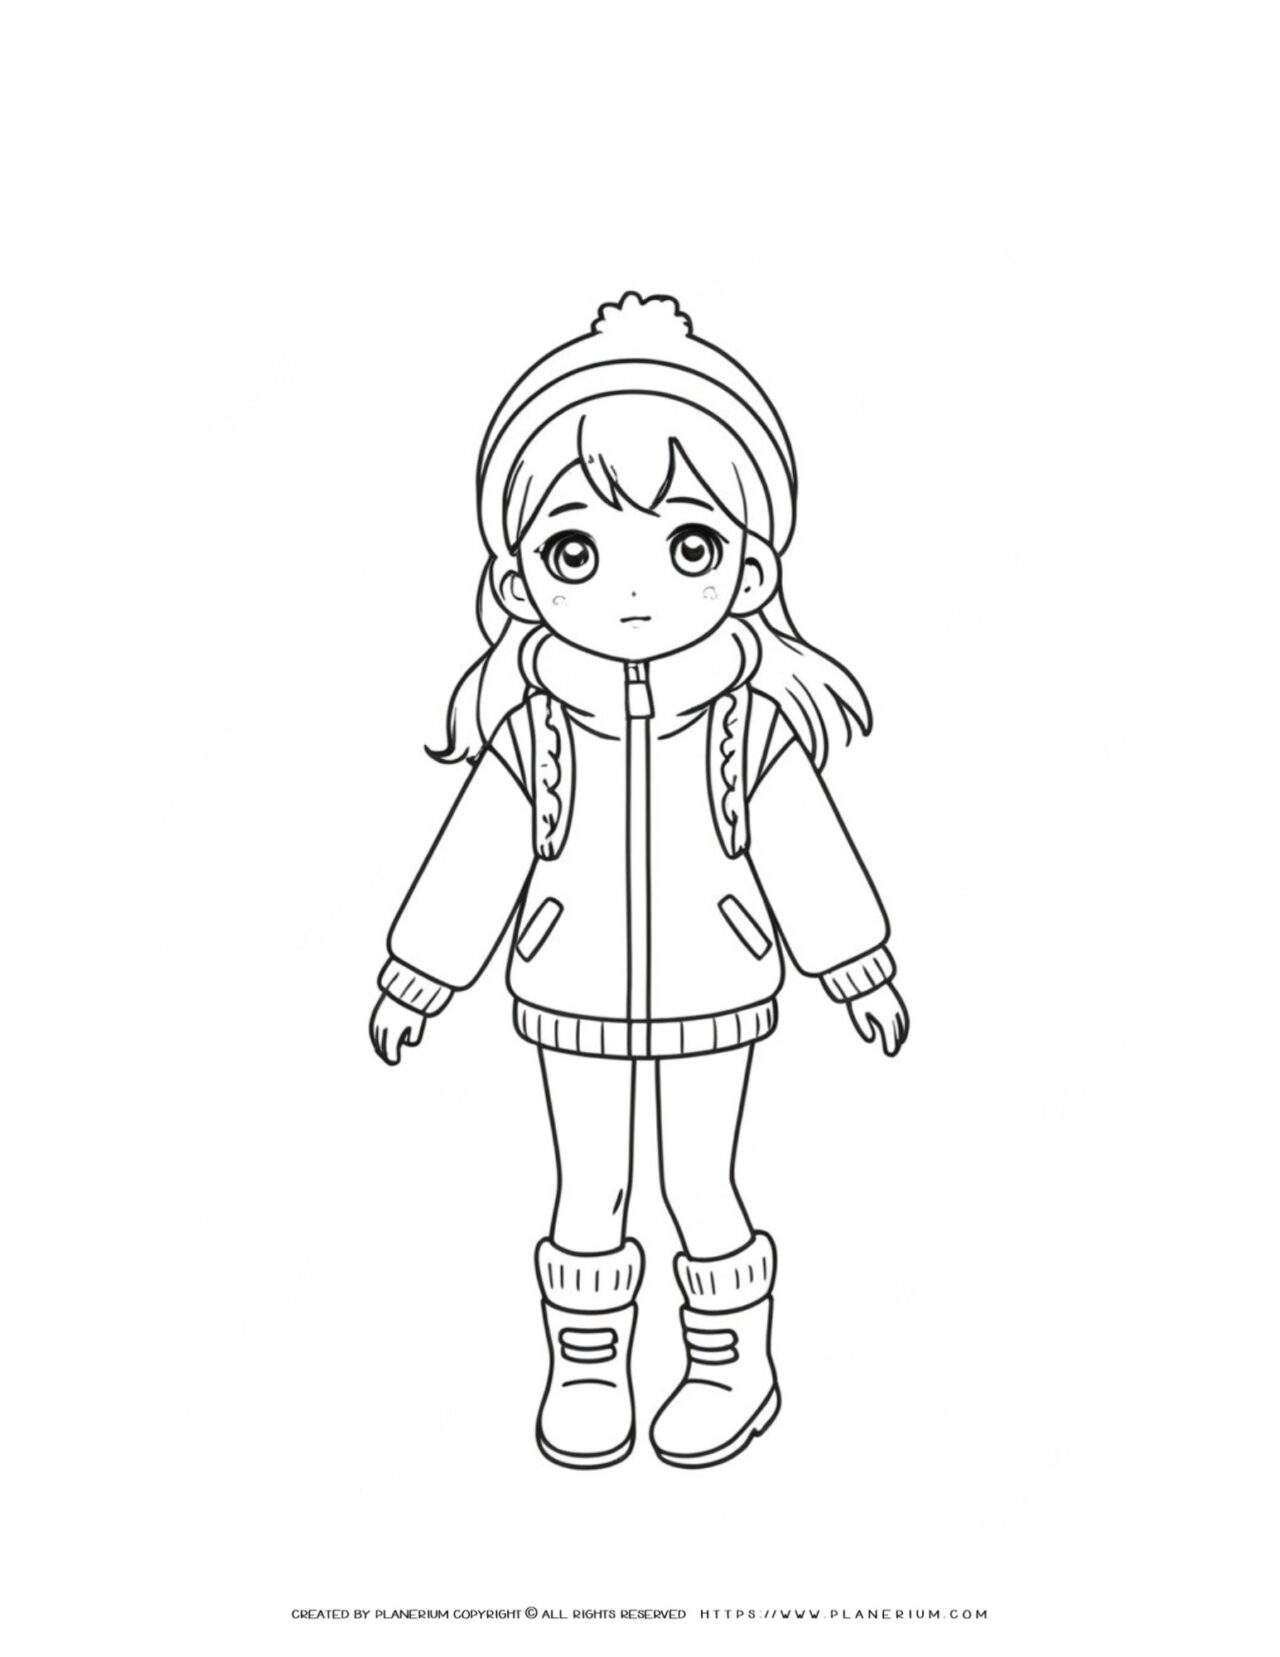 little-girl-in-winter-clothes-anime-style-coloring-page-for-kids